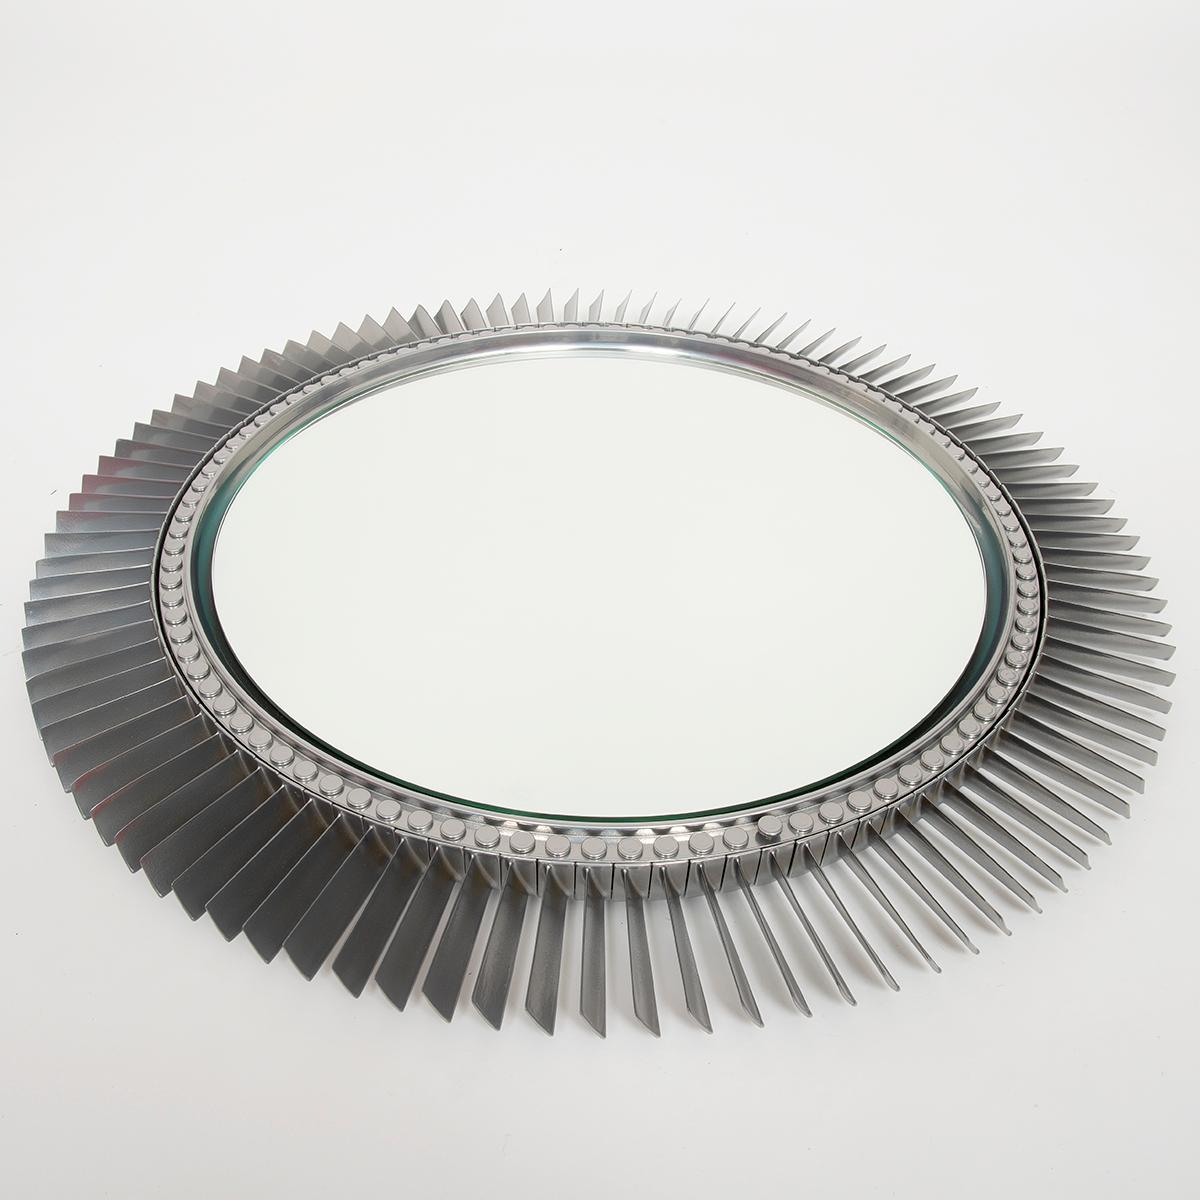 A wall mirror fitted to the engine fan blade from a Rolls Royce Avon jet engine, which powered the RAF Canberra Nuclear Bomber. Rolls Royce engines are complex and astonishingly well manufactured: this being one of a number of highly engineered jet